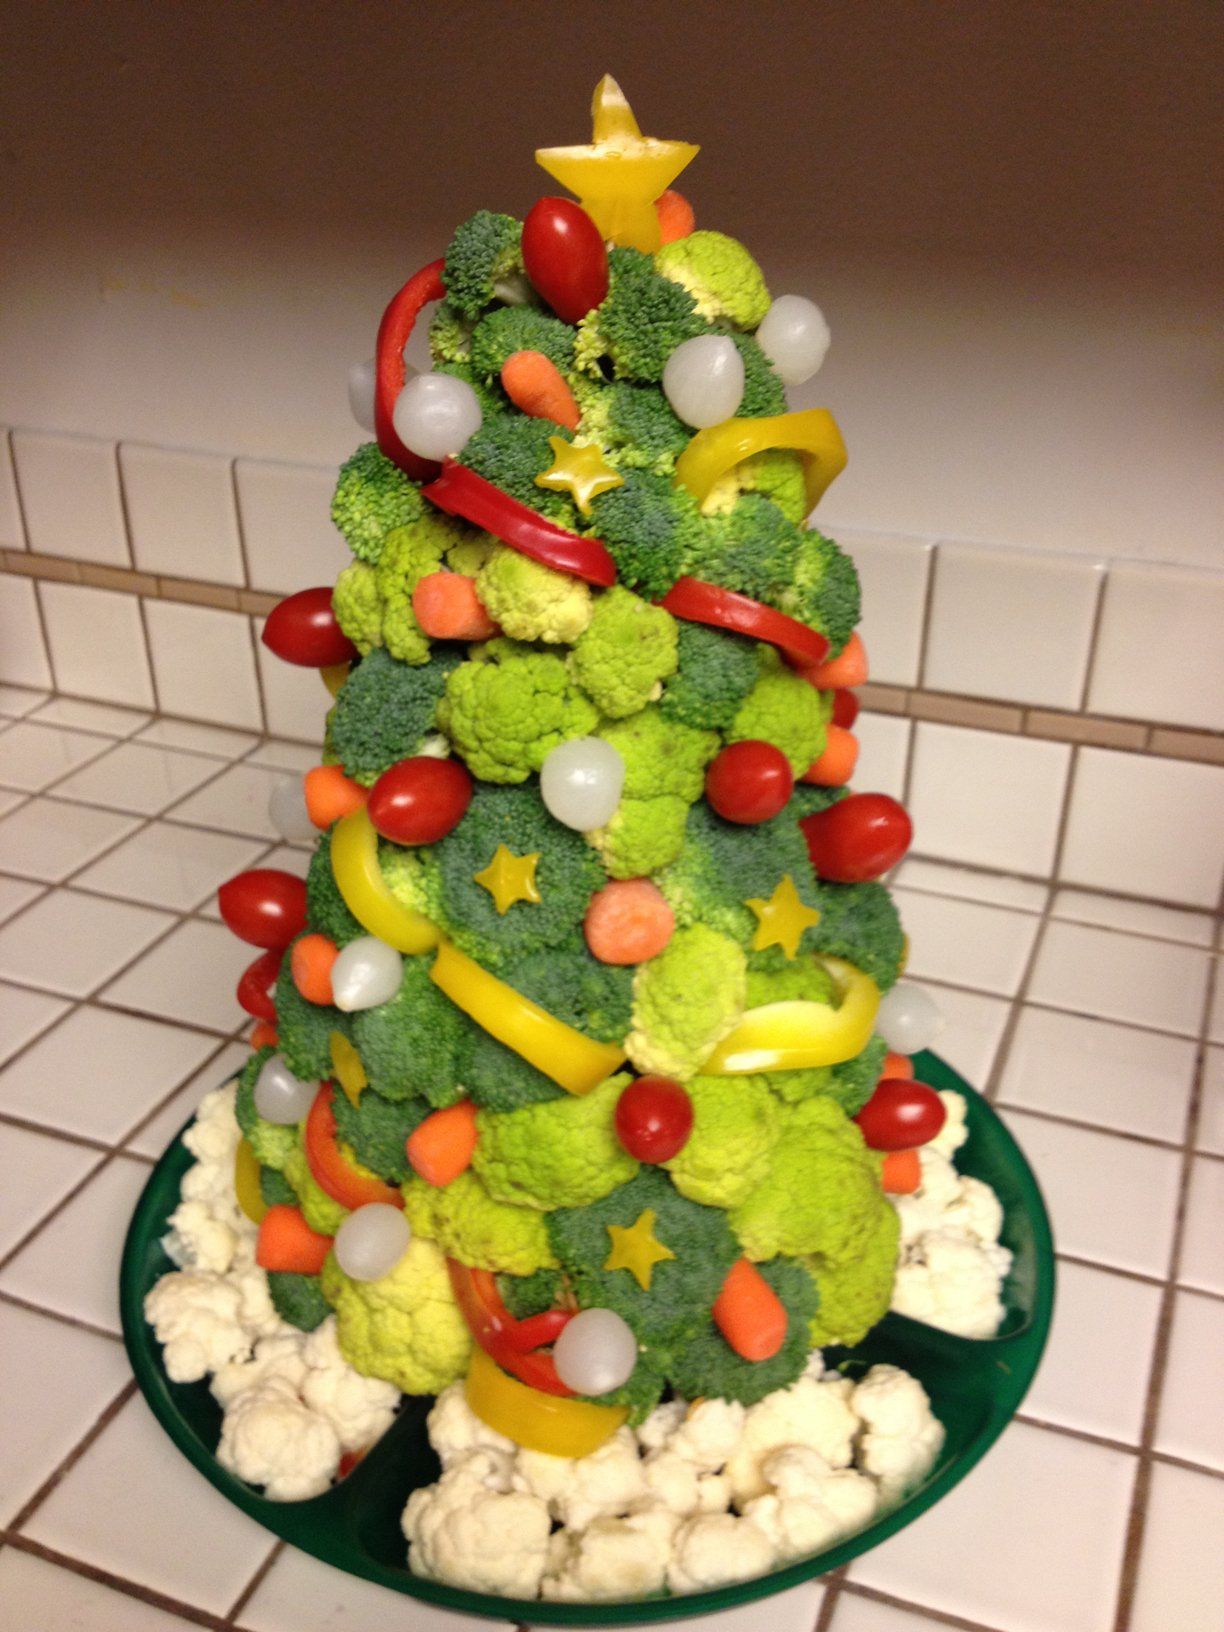 The veggie Christmas tree is the most unique vegetable and dip platter for a hol